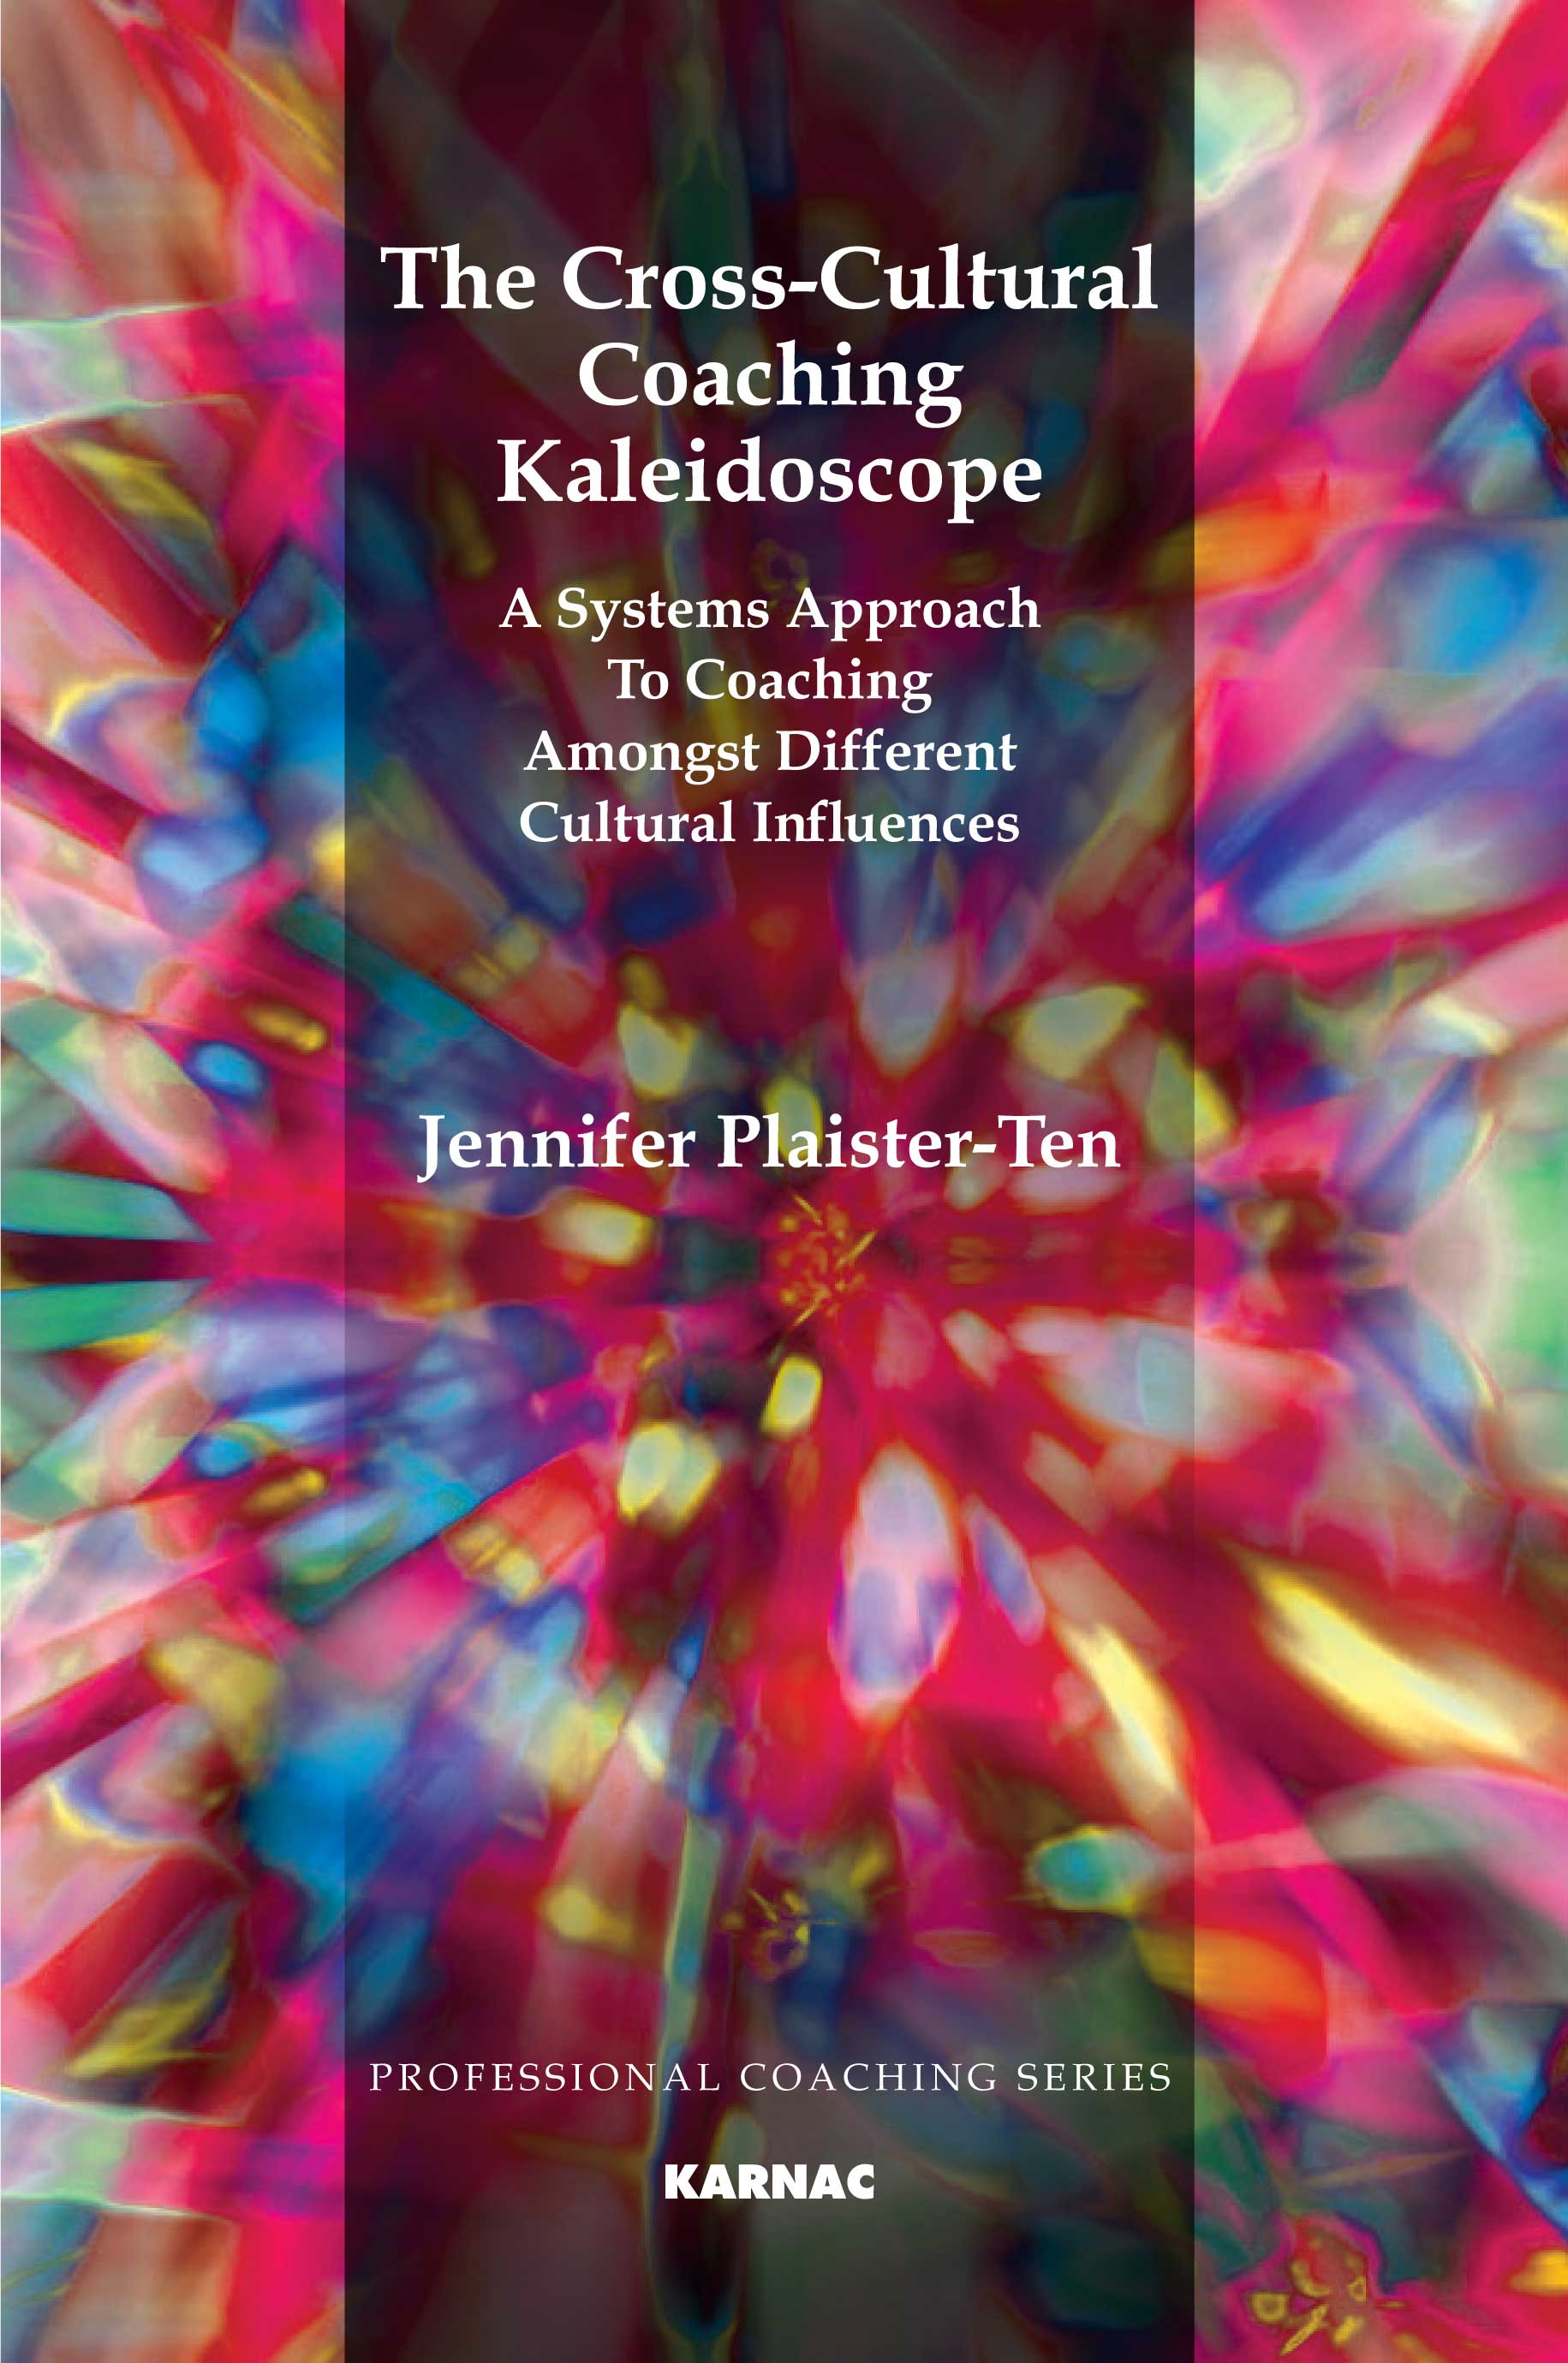 The Cross-Cultural Coaching Kaleidoscope: A Systems Approach to Coaching Amongst Different Cultural Influences